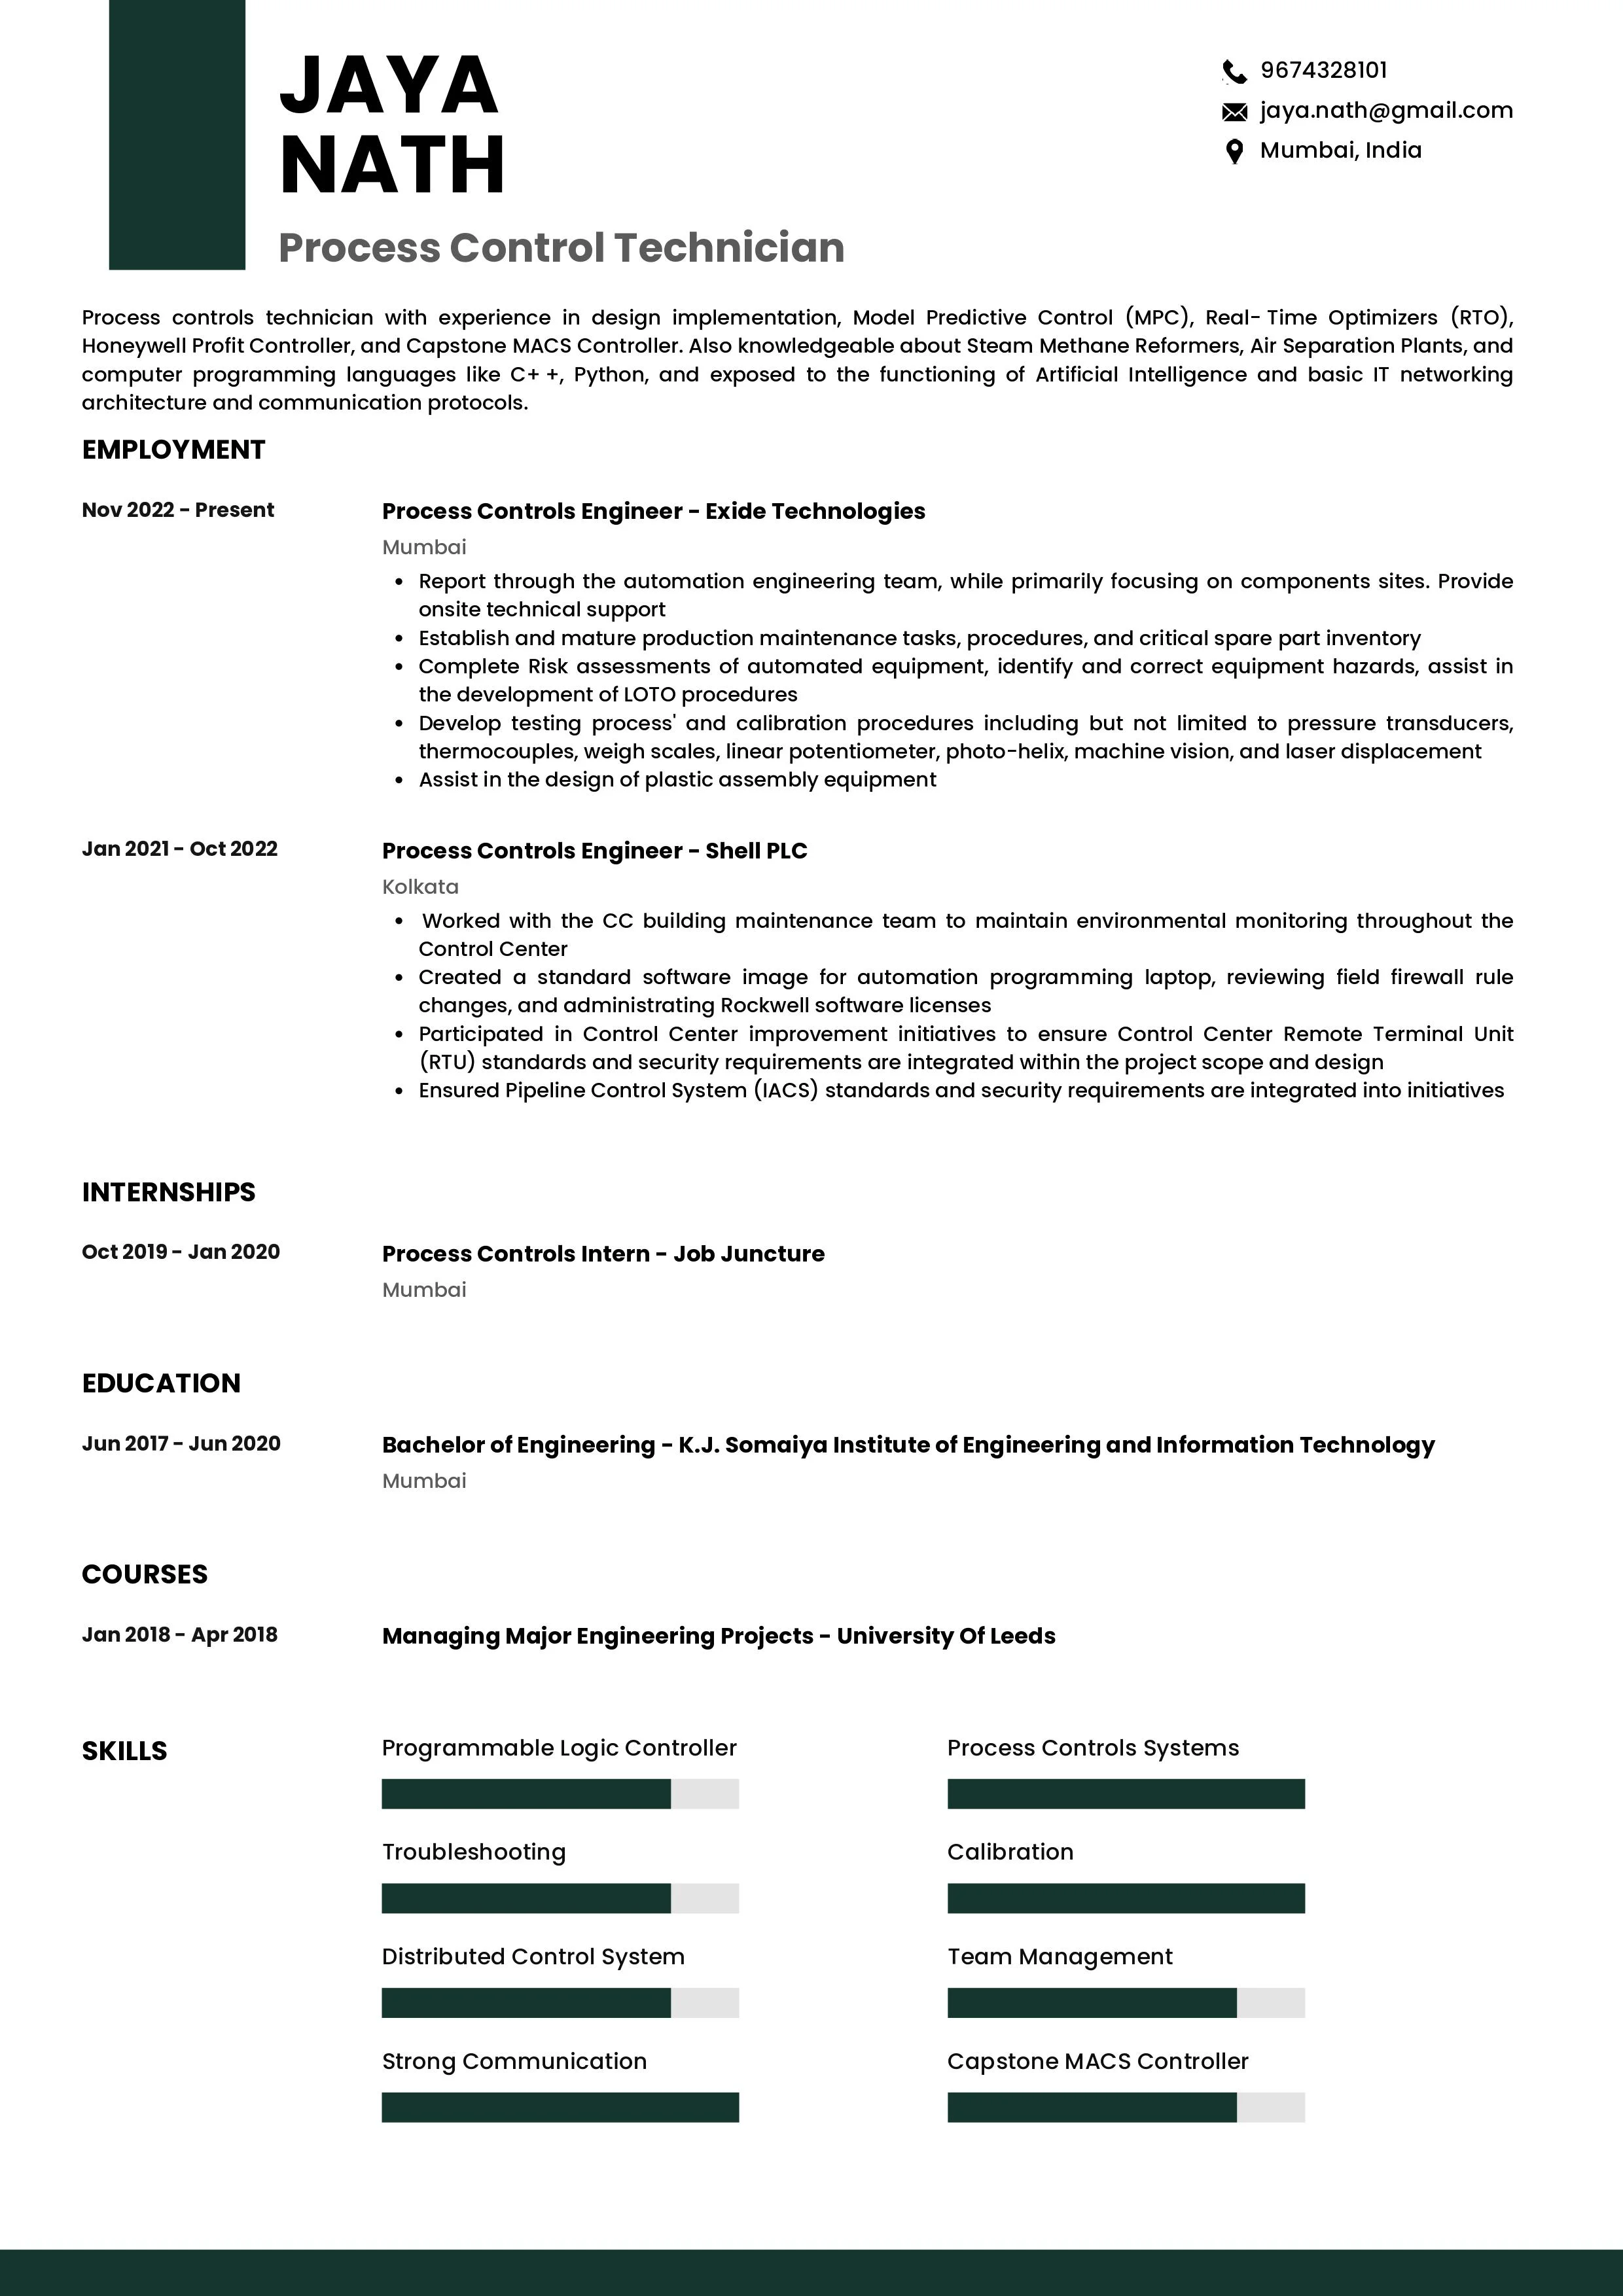 Sample Resume of Process Controls Technician | Free Resume Templates & Samples on Resumod.co